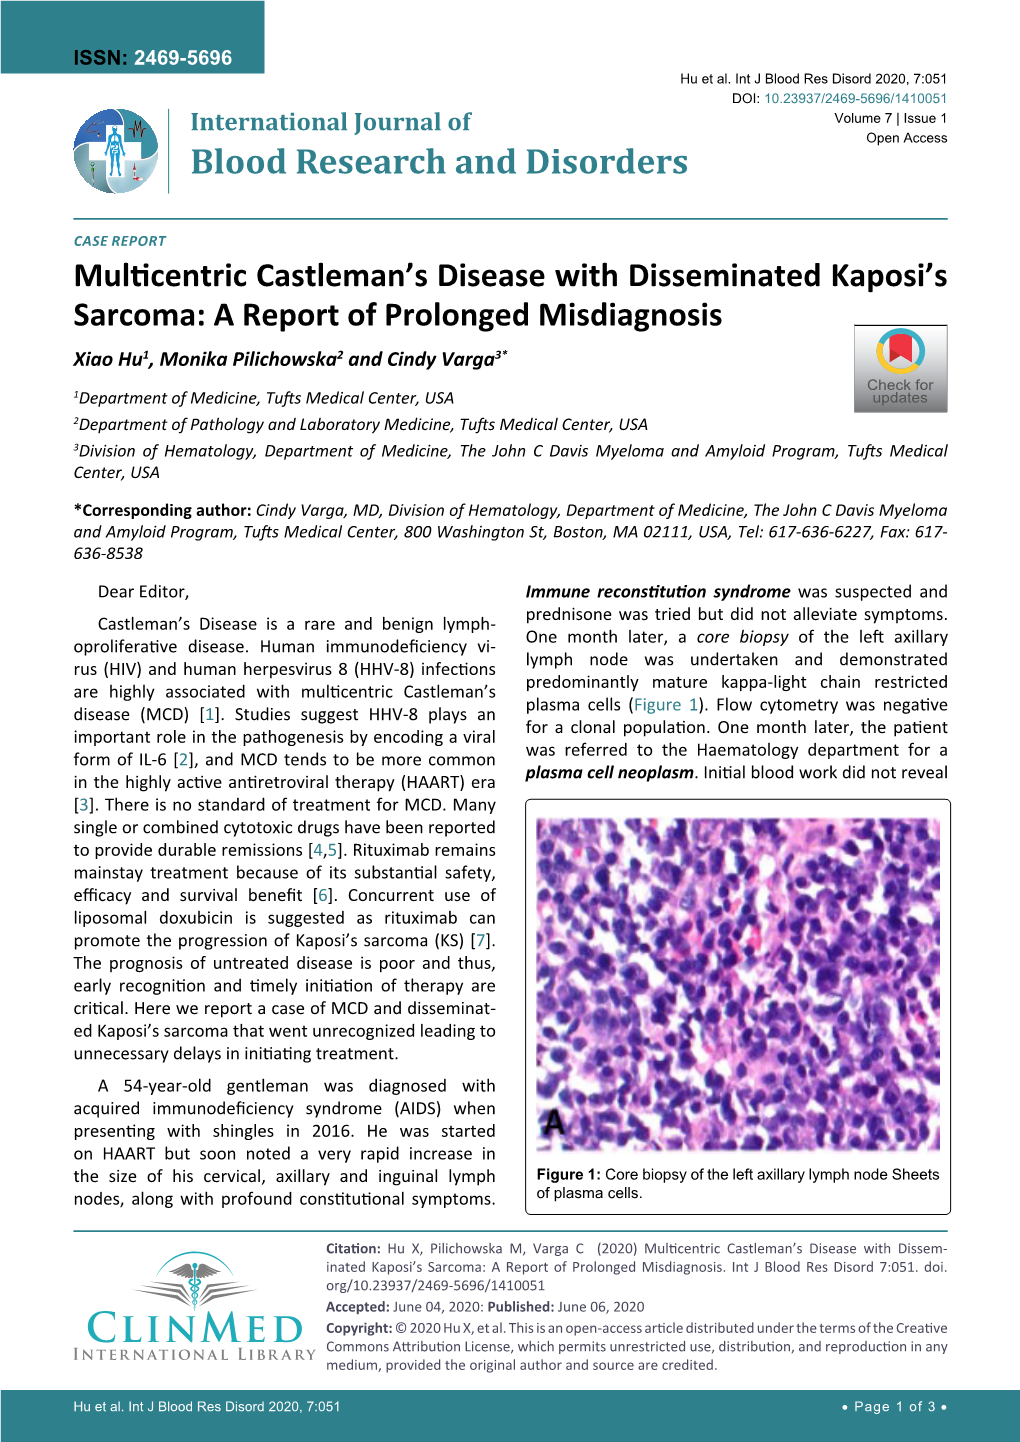 Multicentric Castleman's Disease with Disseminated Kaposi's Sarcoma